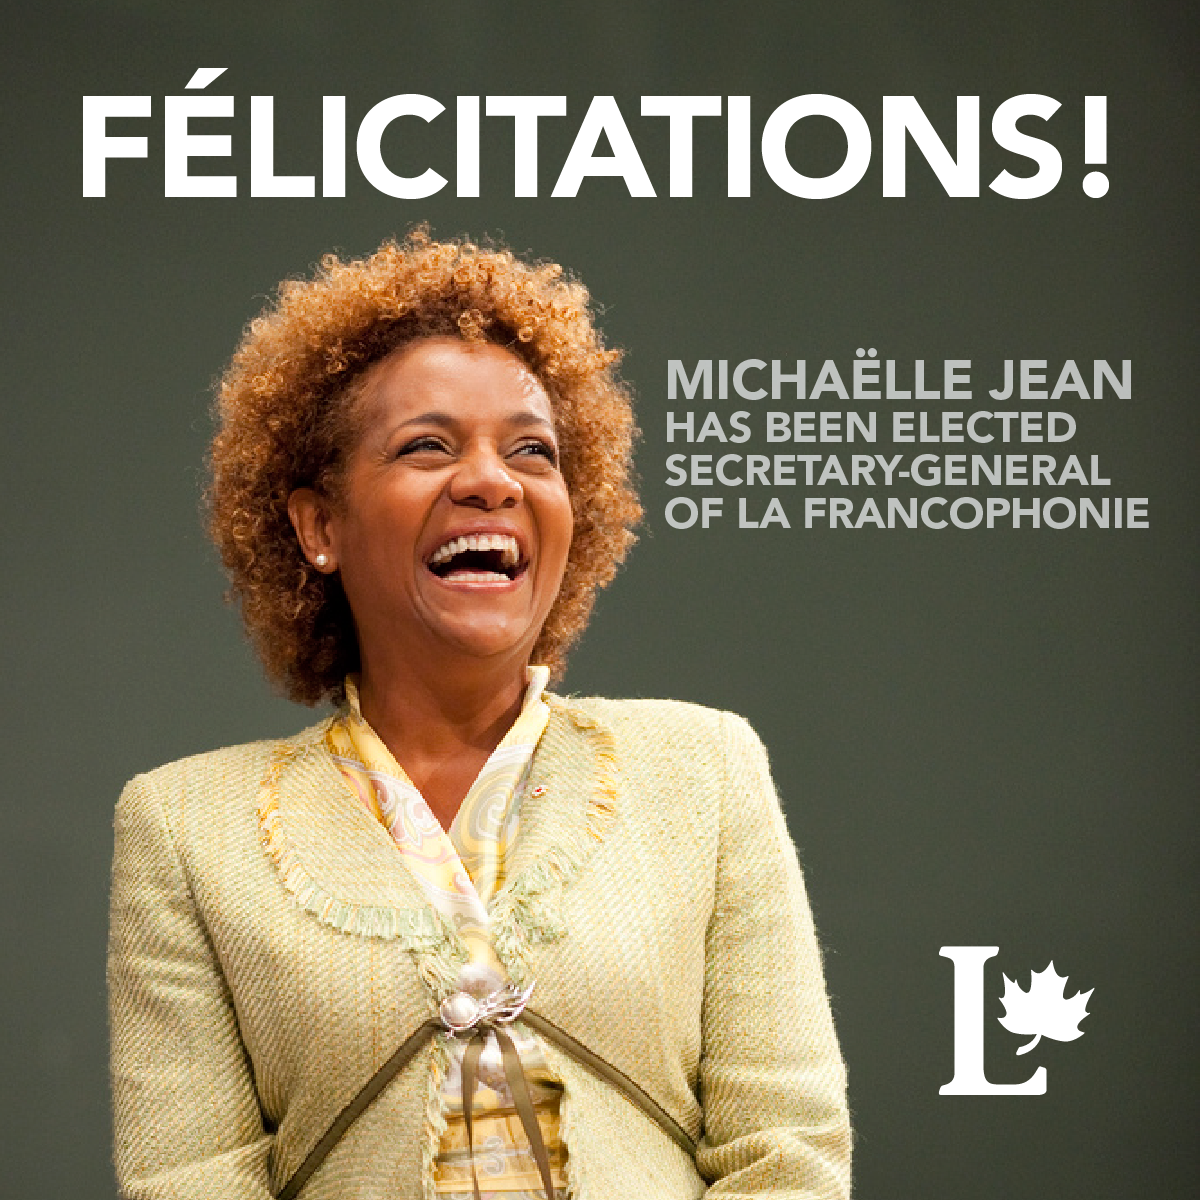 Michaelle Jean has been elected as the new Secretary General of La Francophonie